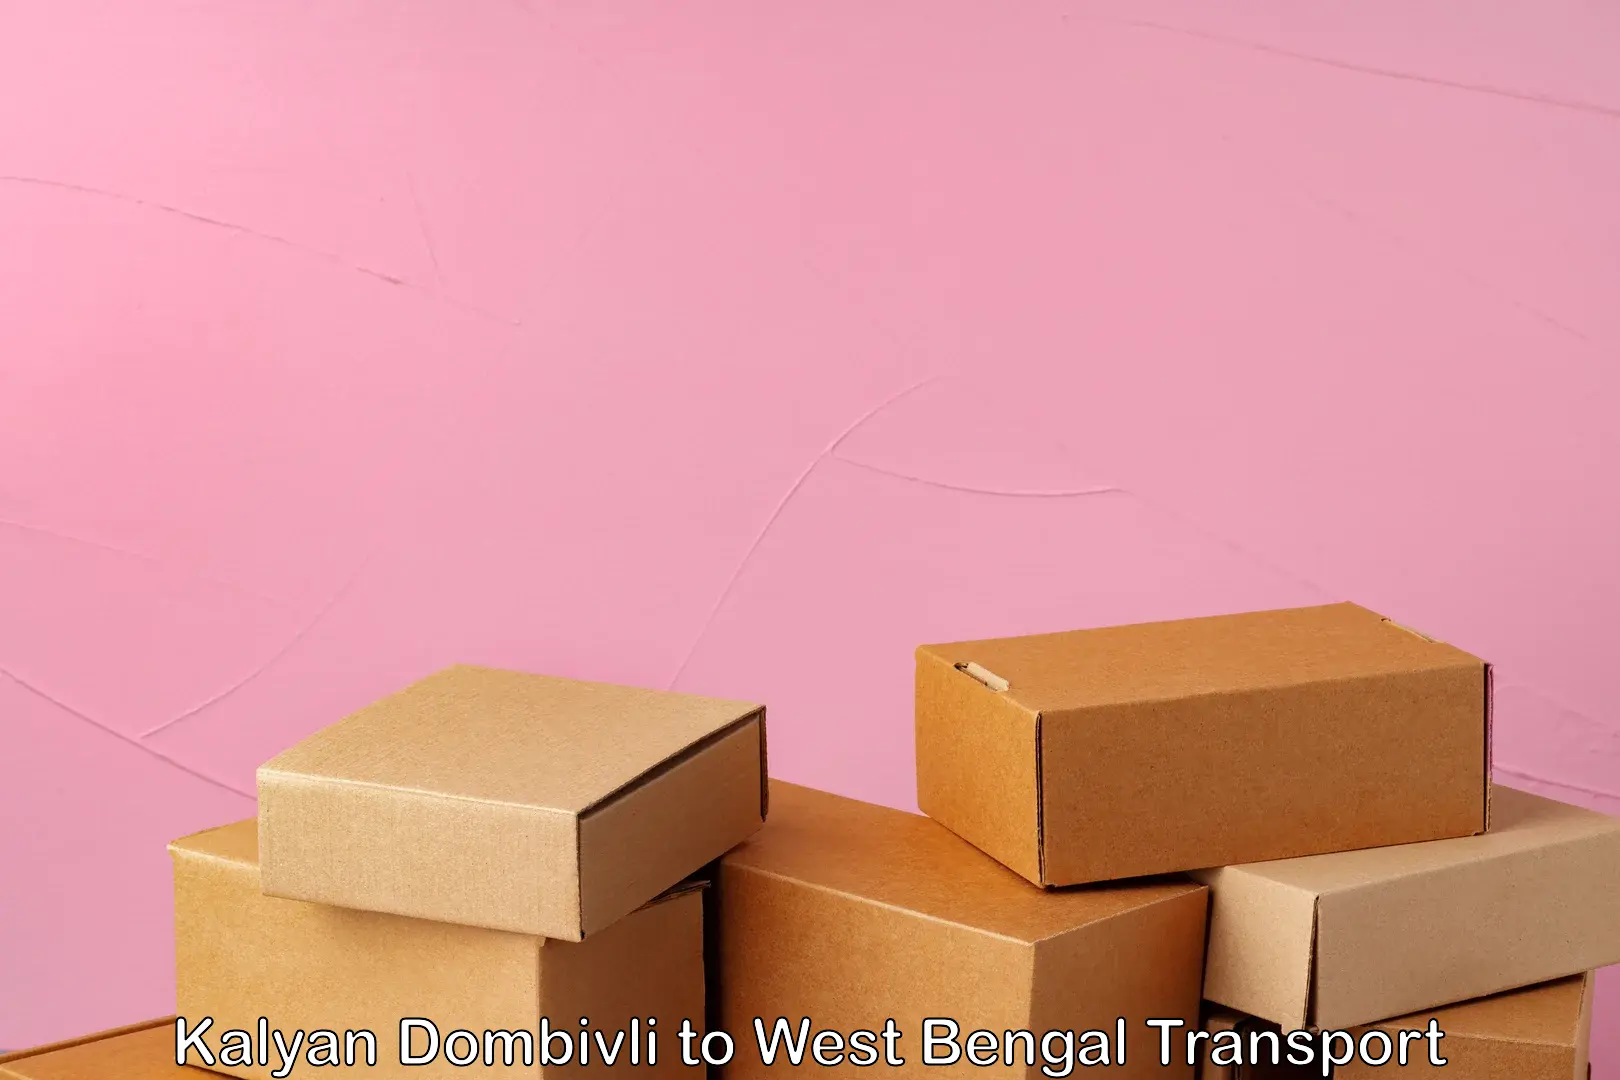 Truck transport companies in India Kalyan Dombivli to Paranpur